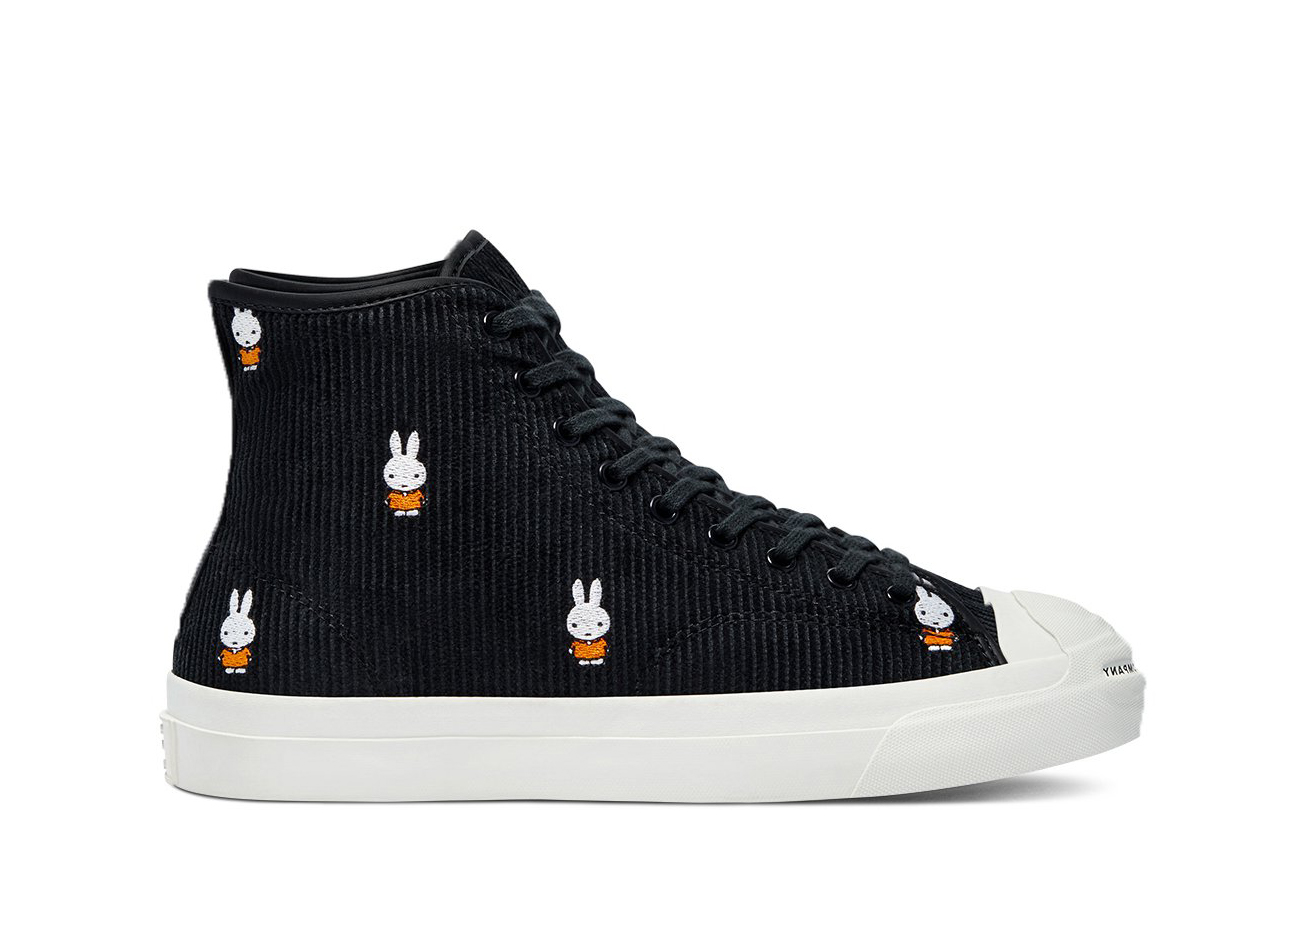 Converse Jack Purcell Pro Pop Trading Company Miffy Corduroy ...